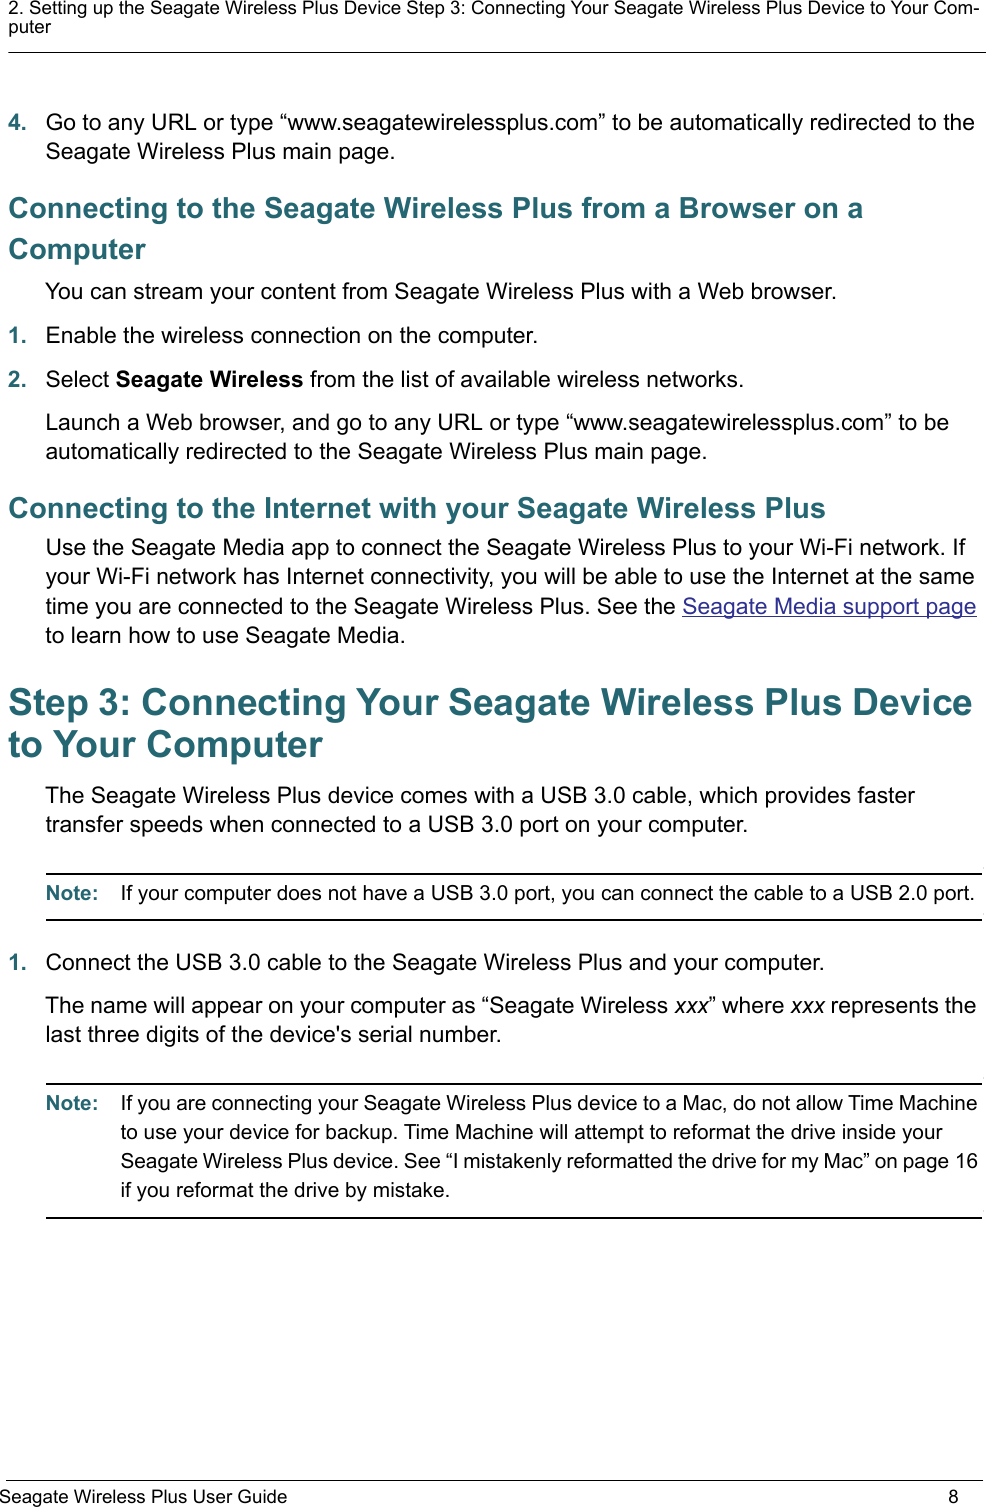 2. Setting up the Seagate Wireless Plus Device Step 3: Connecting Your Seagate Wireless Plus Device to Your Com-puterSeagate Wireless Plus User Guide 84. Go to any URL or type “www.seagatewirelessplus.com” to be automatically redirected to the Seagate Wireless Plus main page.Connecting to the Seagate Wireless Plus from a Browser on a ComputerYou can stream your content from Seagate Wireless Plus with a Web browser. 1. Enable the wireless connection on the computer.2. Select Seagate Wireless from the list of available wireless networks.Launch a Web browser, and go to any URL or type “www.seagatewirelessplus.com” to be automatically redirected to the Seagate Wireless Plus main page.Connecting to the Internet with your Seagate Wireless PlusUse the Seagate Media app to connect the Seagate Wireless Plus to your Wi-Fi network. If your Wi-Fi network has Internet connectivity, you will be able to use the Internet at the same time you are connected to the Seagate Wireless Plus. See the Seagate Media support page to learn how to use Seagate Media.Step 3: Connecting Your Seagate Wireless Plus Device to Your ComputerThe Seagate Wireless Plus device comes with a USB 3.0 cable, which provides faster transfer speeds when connected to a USB 3.0 port on your computer. Note:  If your computer does not have a USB 3.0 port, you can connect the cable to a USB 2.0 port.1. Connect the USB 3.0 cable to the Seagate Wireless Plus and your computer. The name will appear on your computer as “Seagate Wireless xxx” where xxx represents the last three digits of the device&apos;s serial number.Note:  If you are connecting your Seagate Wireless Plus device to a Mac, do not allow Time Machine to use your device for backup. Time Machine will attempt to reformat the drive inside your Seagate Wireless Plus device. See “I mistakenly reformatted the drive for my Mac” on page 16 if you reformat the drive by mistake.